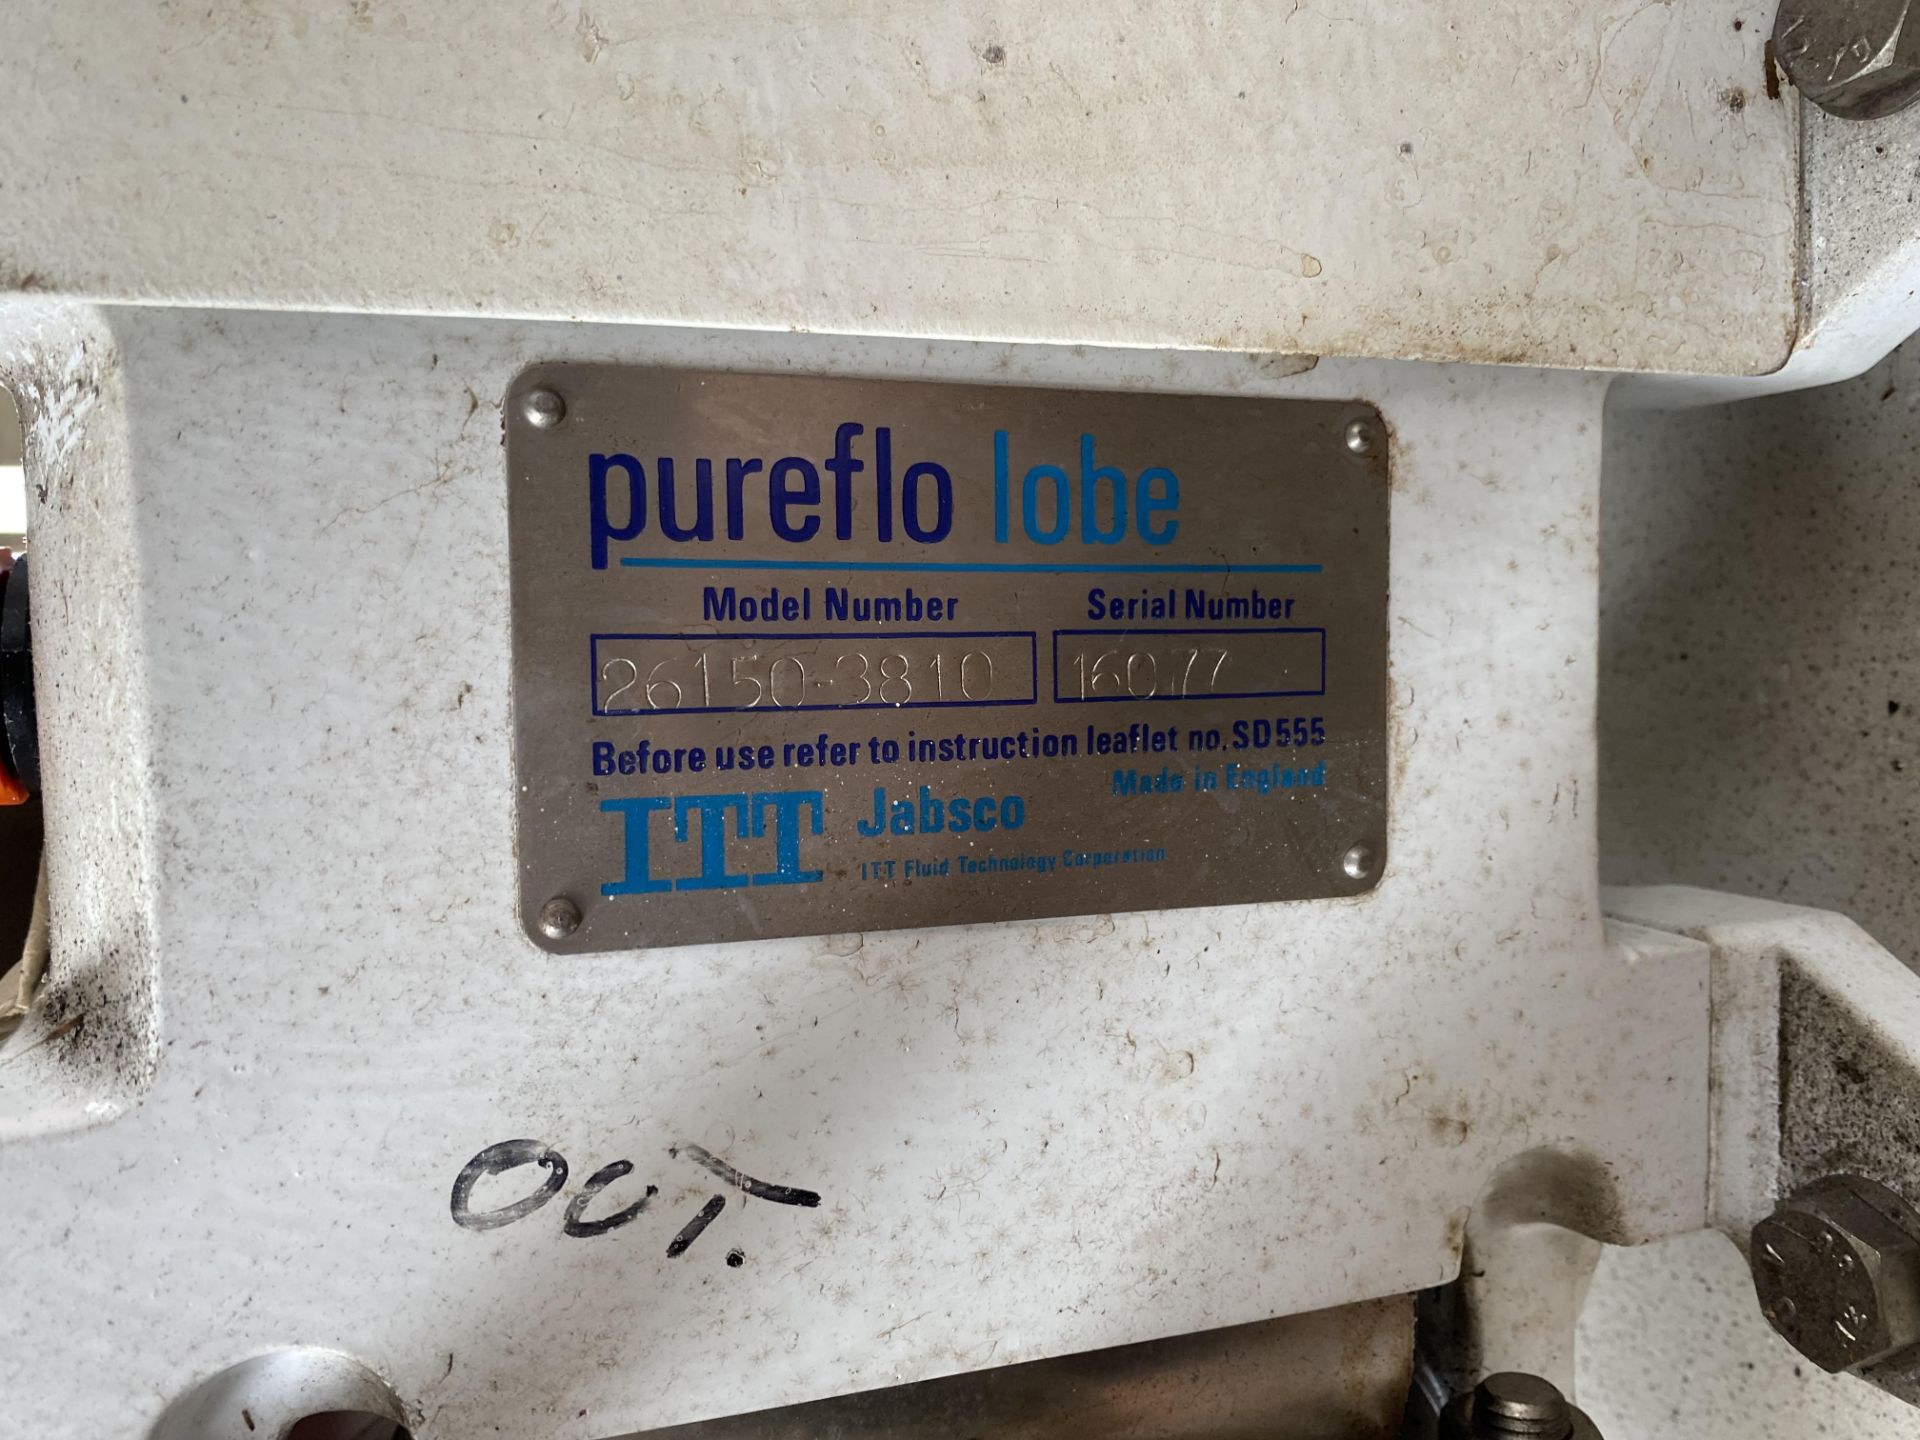 Pureflo 26150-3810 STAINLESS STEEL LOBE PUMP, serial no. 16077, with geared electric motor drive, - Image 5 of 7